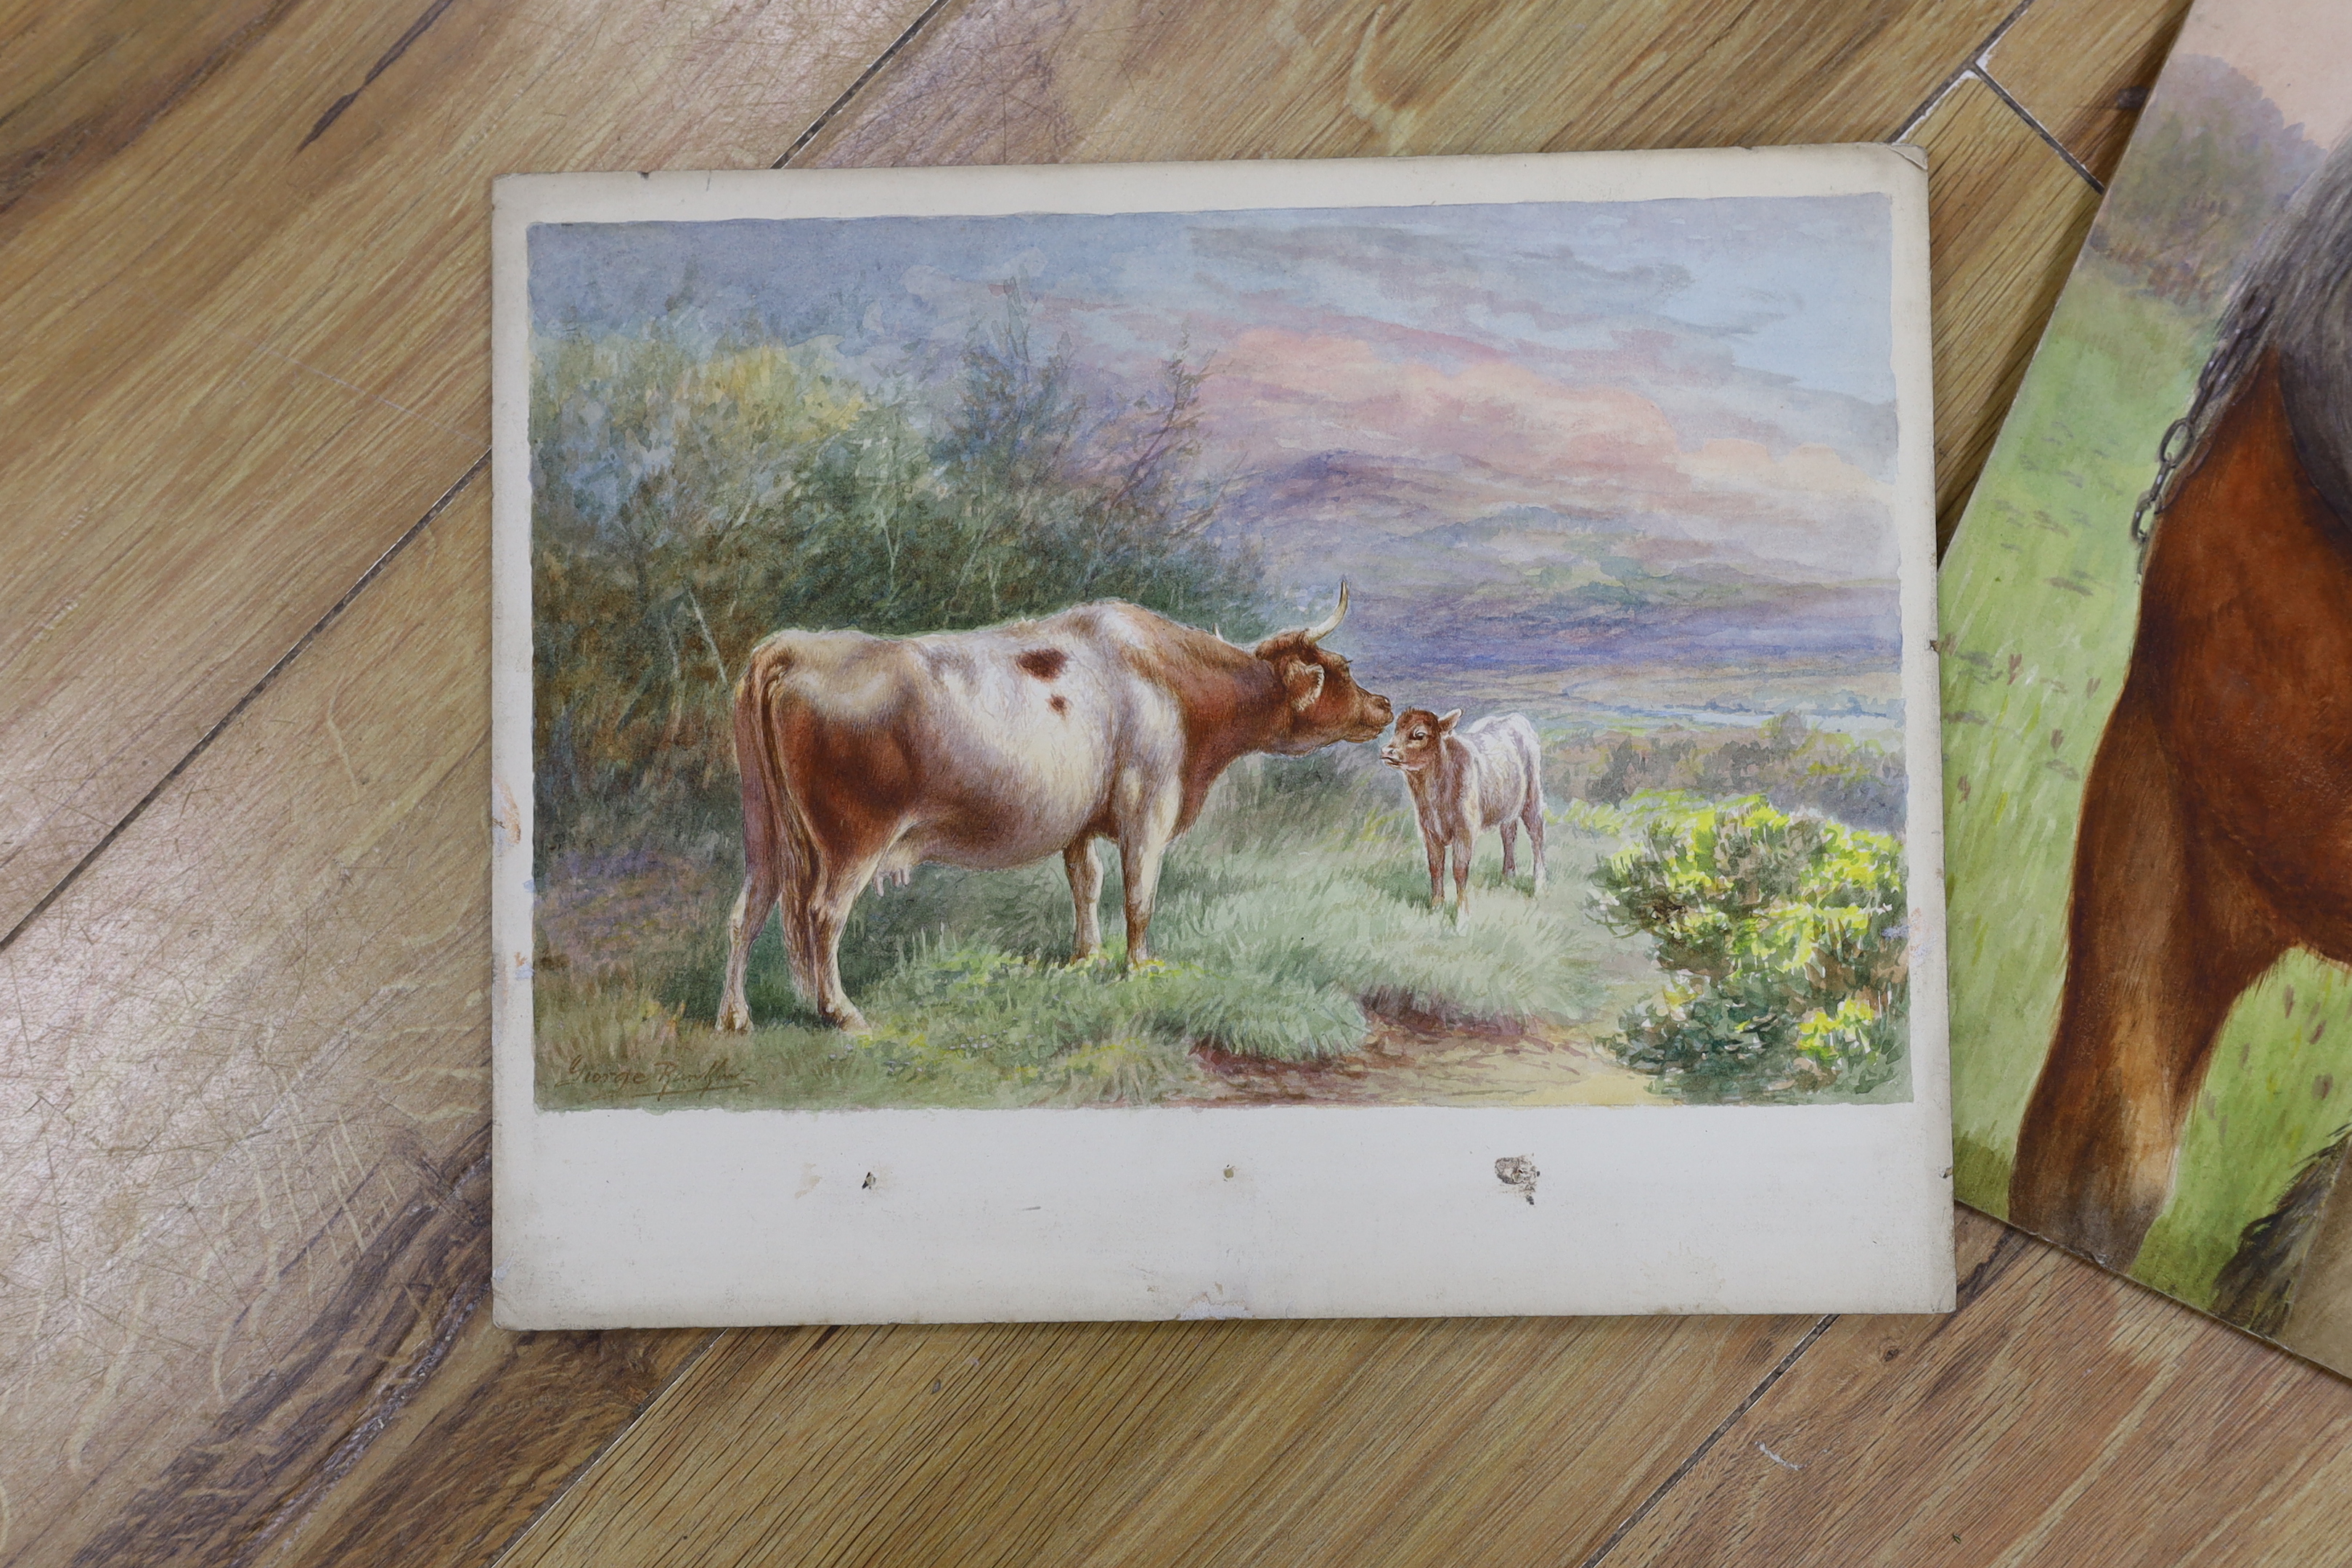 George James Rankin (1864-1937), three watercolours, Ploughman & cart horse, study of a bay horse and cow with calf, each signed, largest 47 x 29cm, unframed